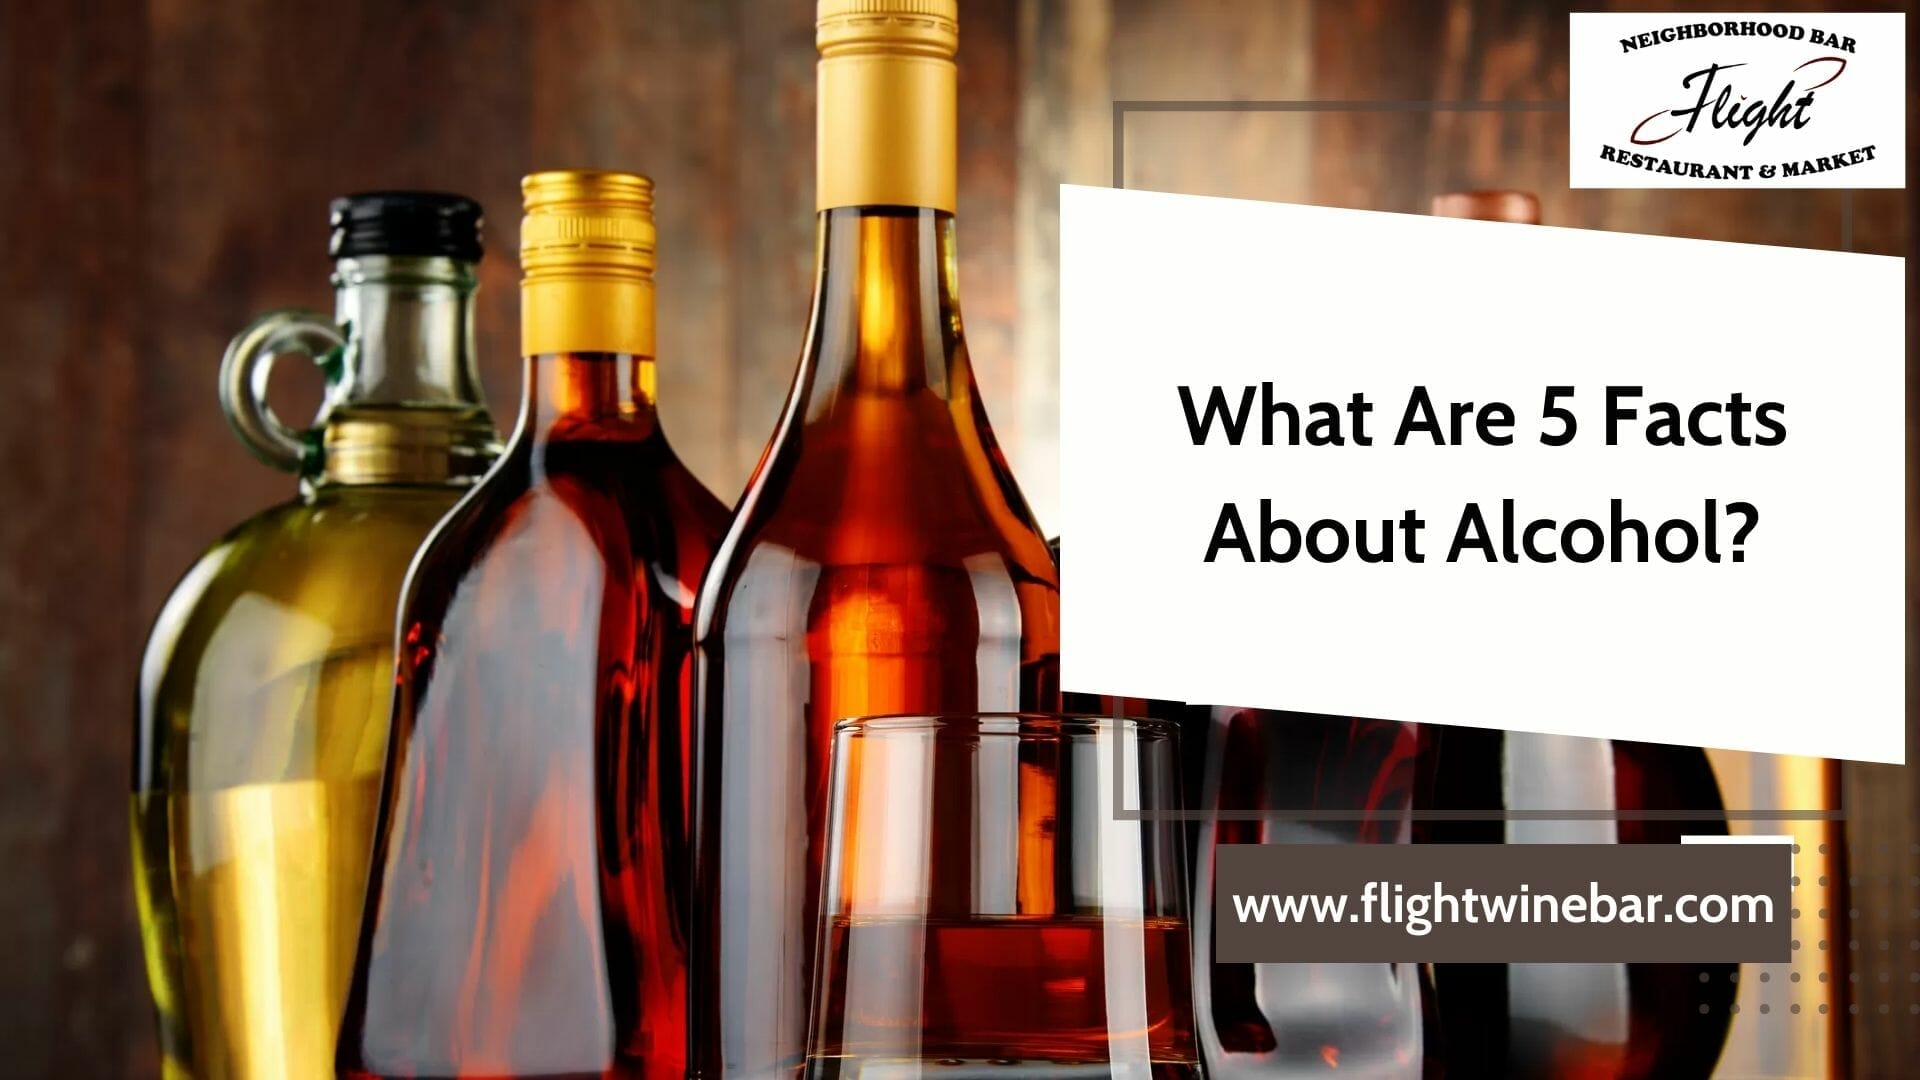 What Are 5 Facts About Alcohol